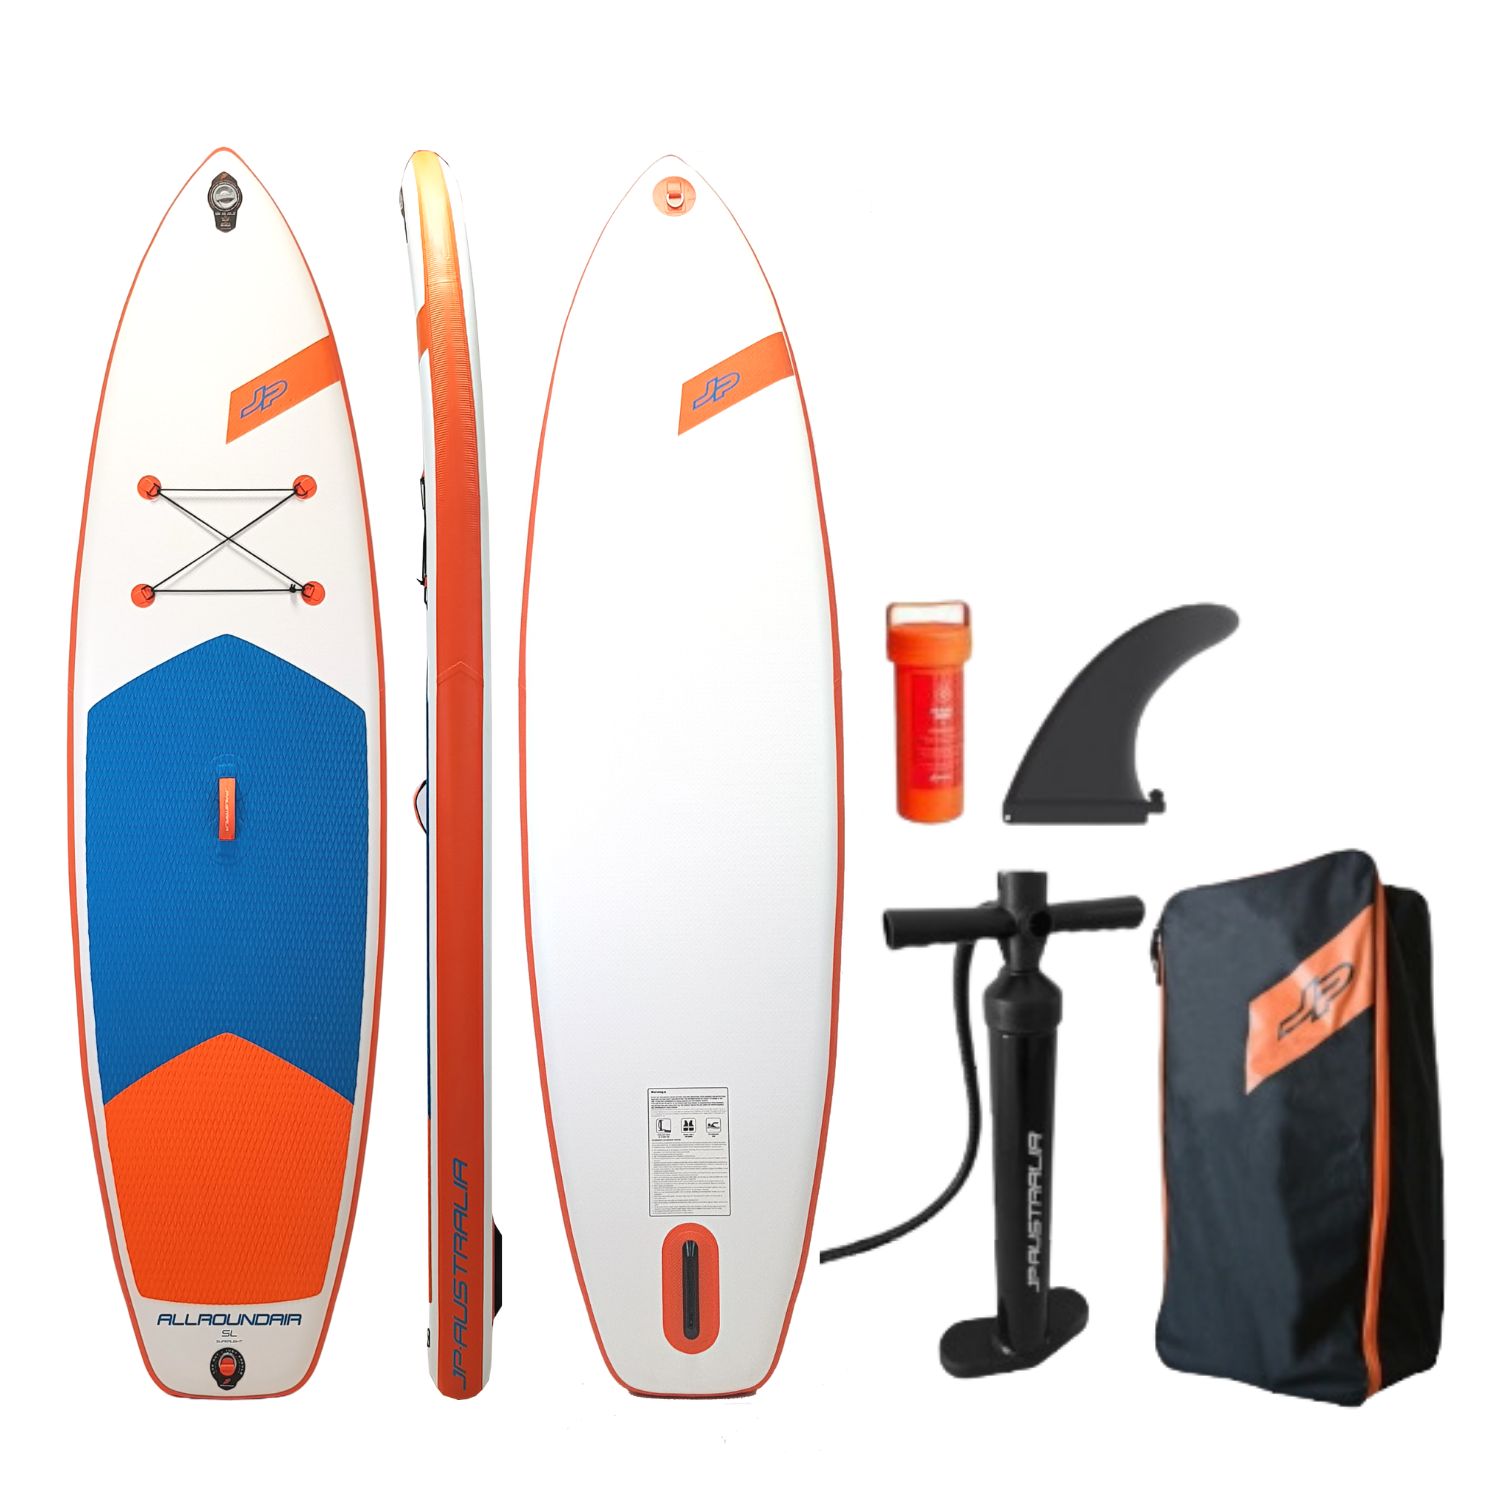 JP SUPERLIGHT SUP INFLATABLE PADDLE BOARD ALL ROUND PADDLEBOARD iSUP PACKAGE 